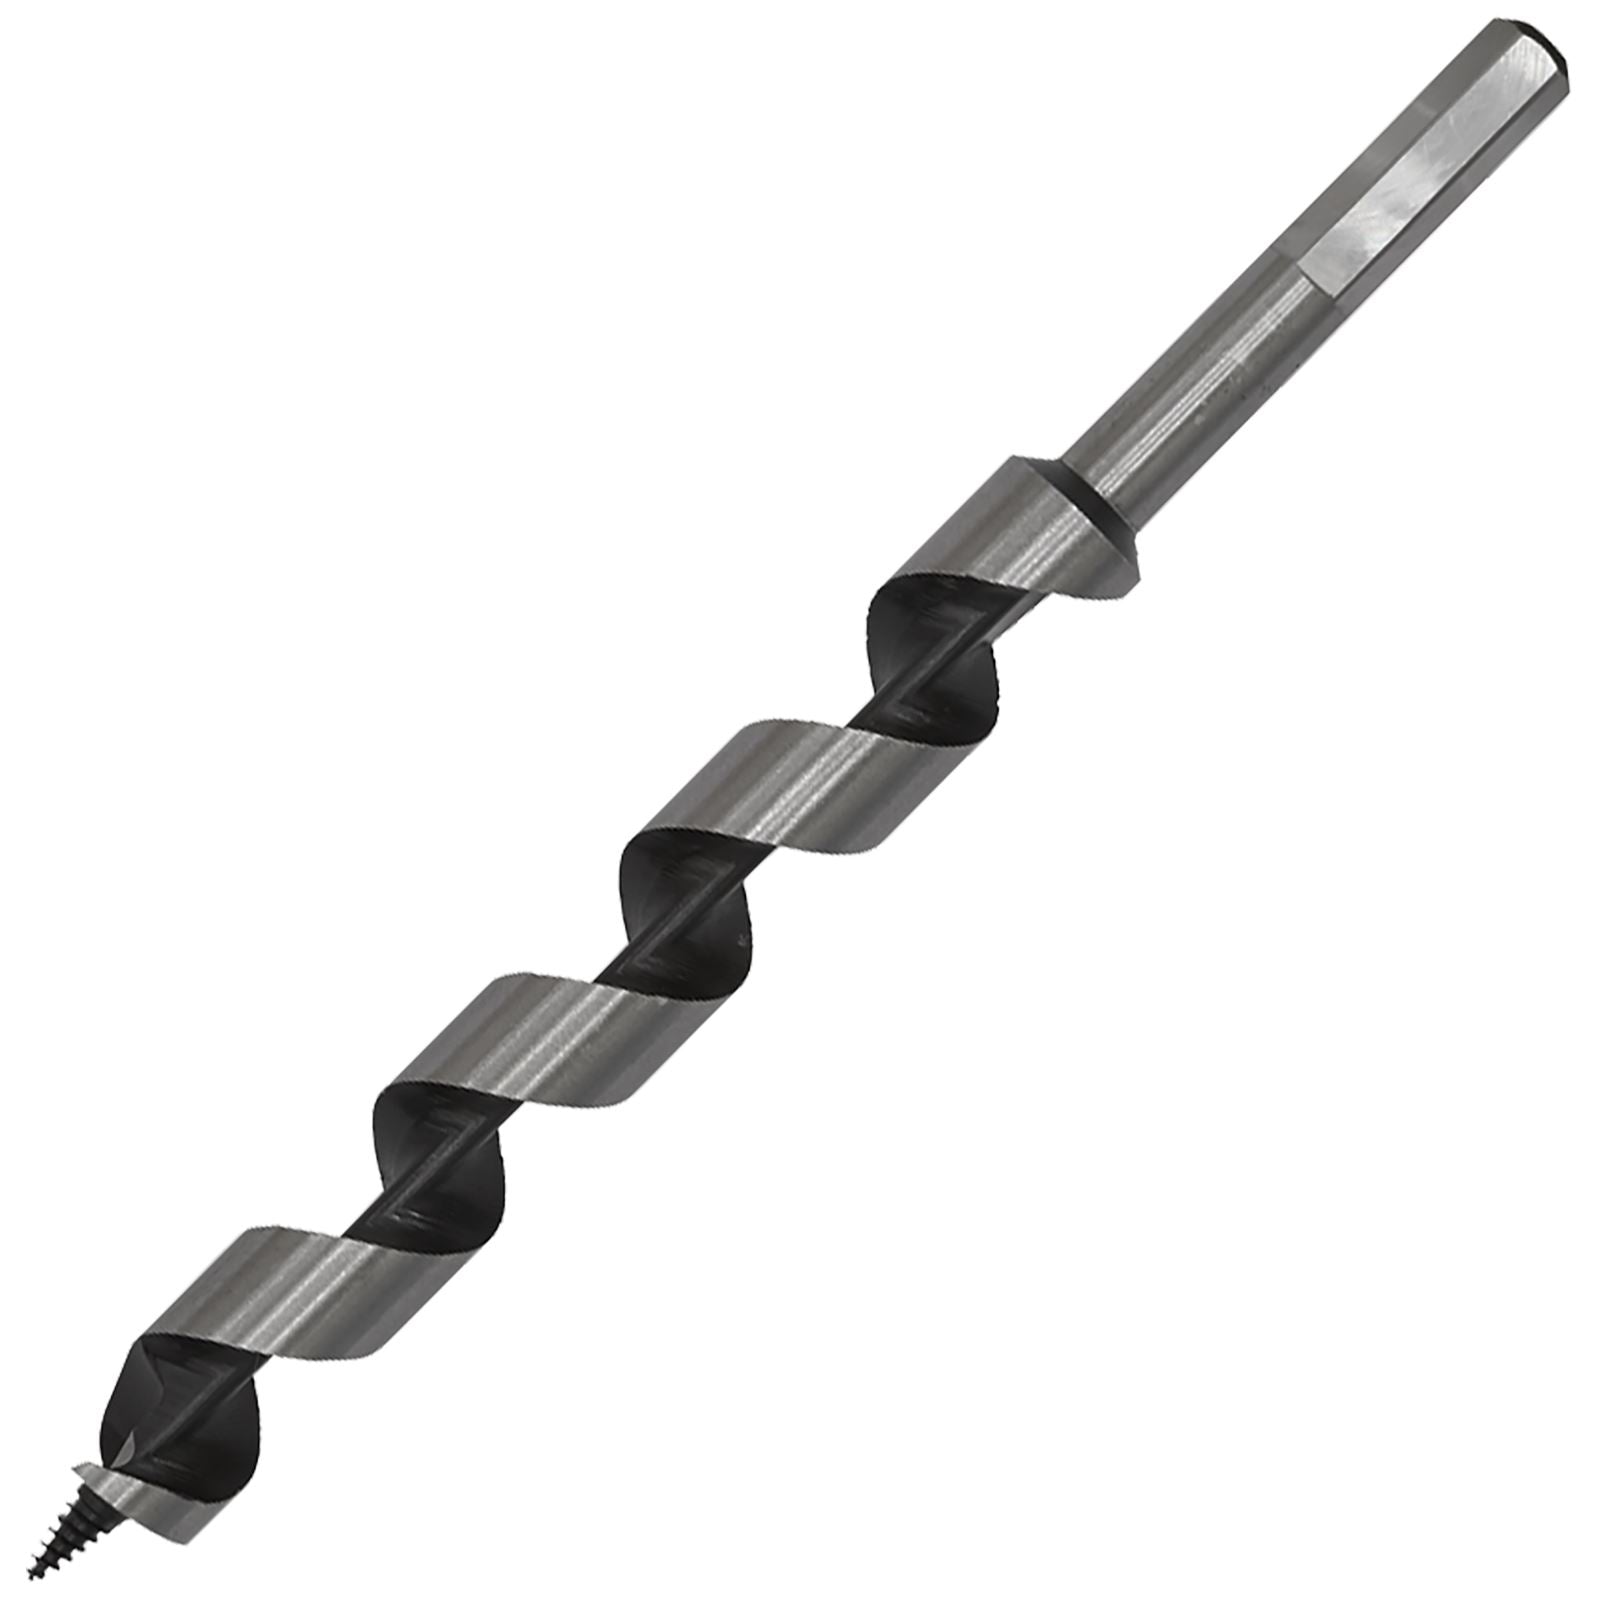 Worksafe by Sealey Auger Wood Drill Bit 20mm x 235mm